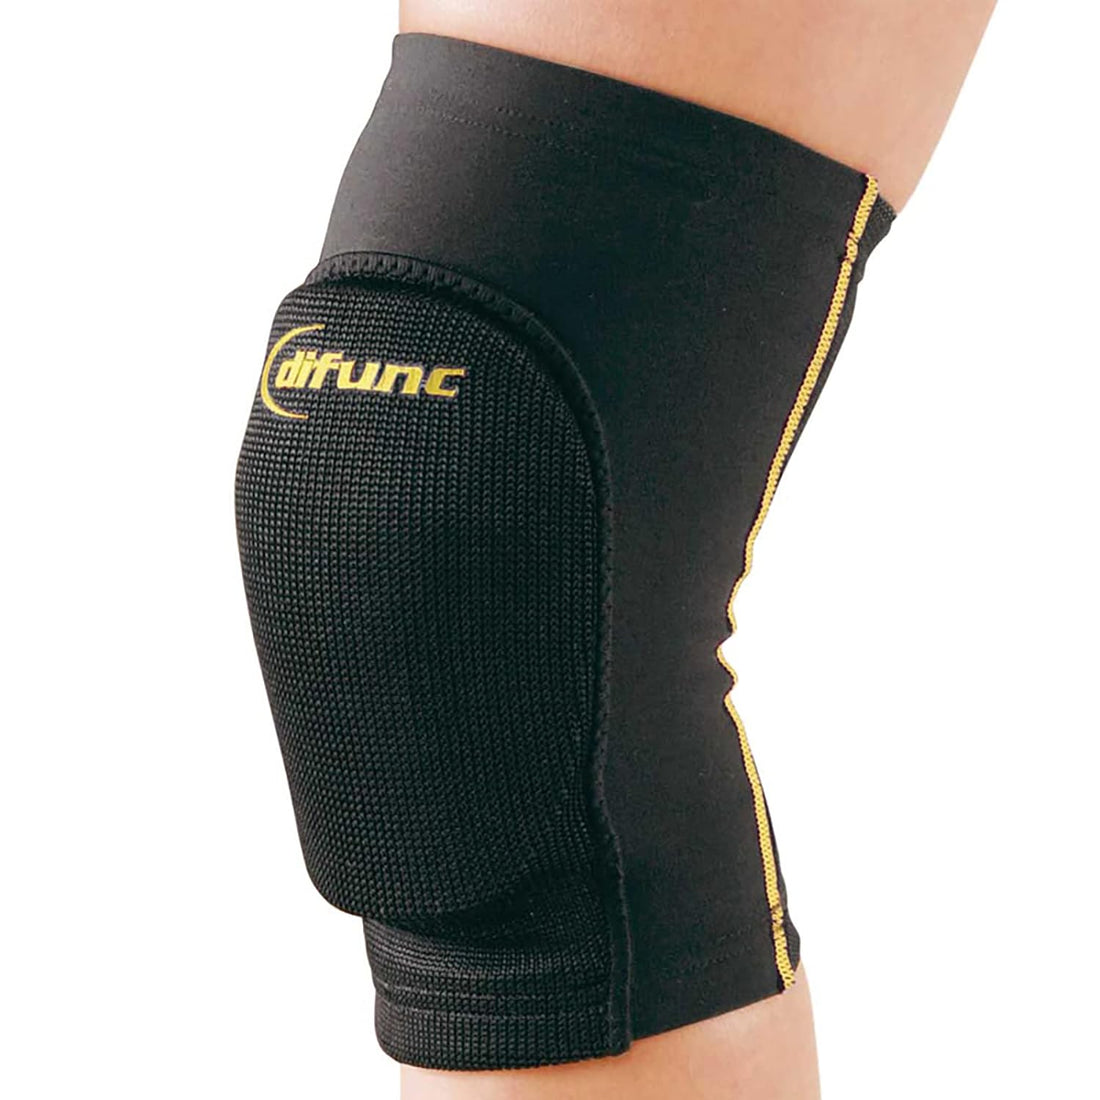 D&M Tricot Knee Pad sleeve, 12mm thick pad, 1pc, Made In Japan (Medium, Black x Gold)